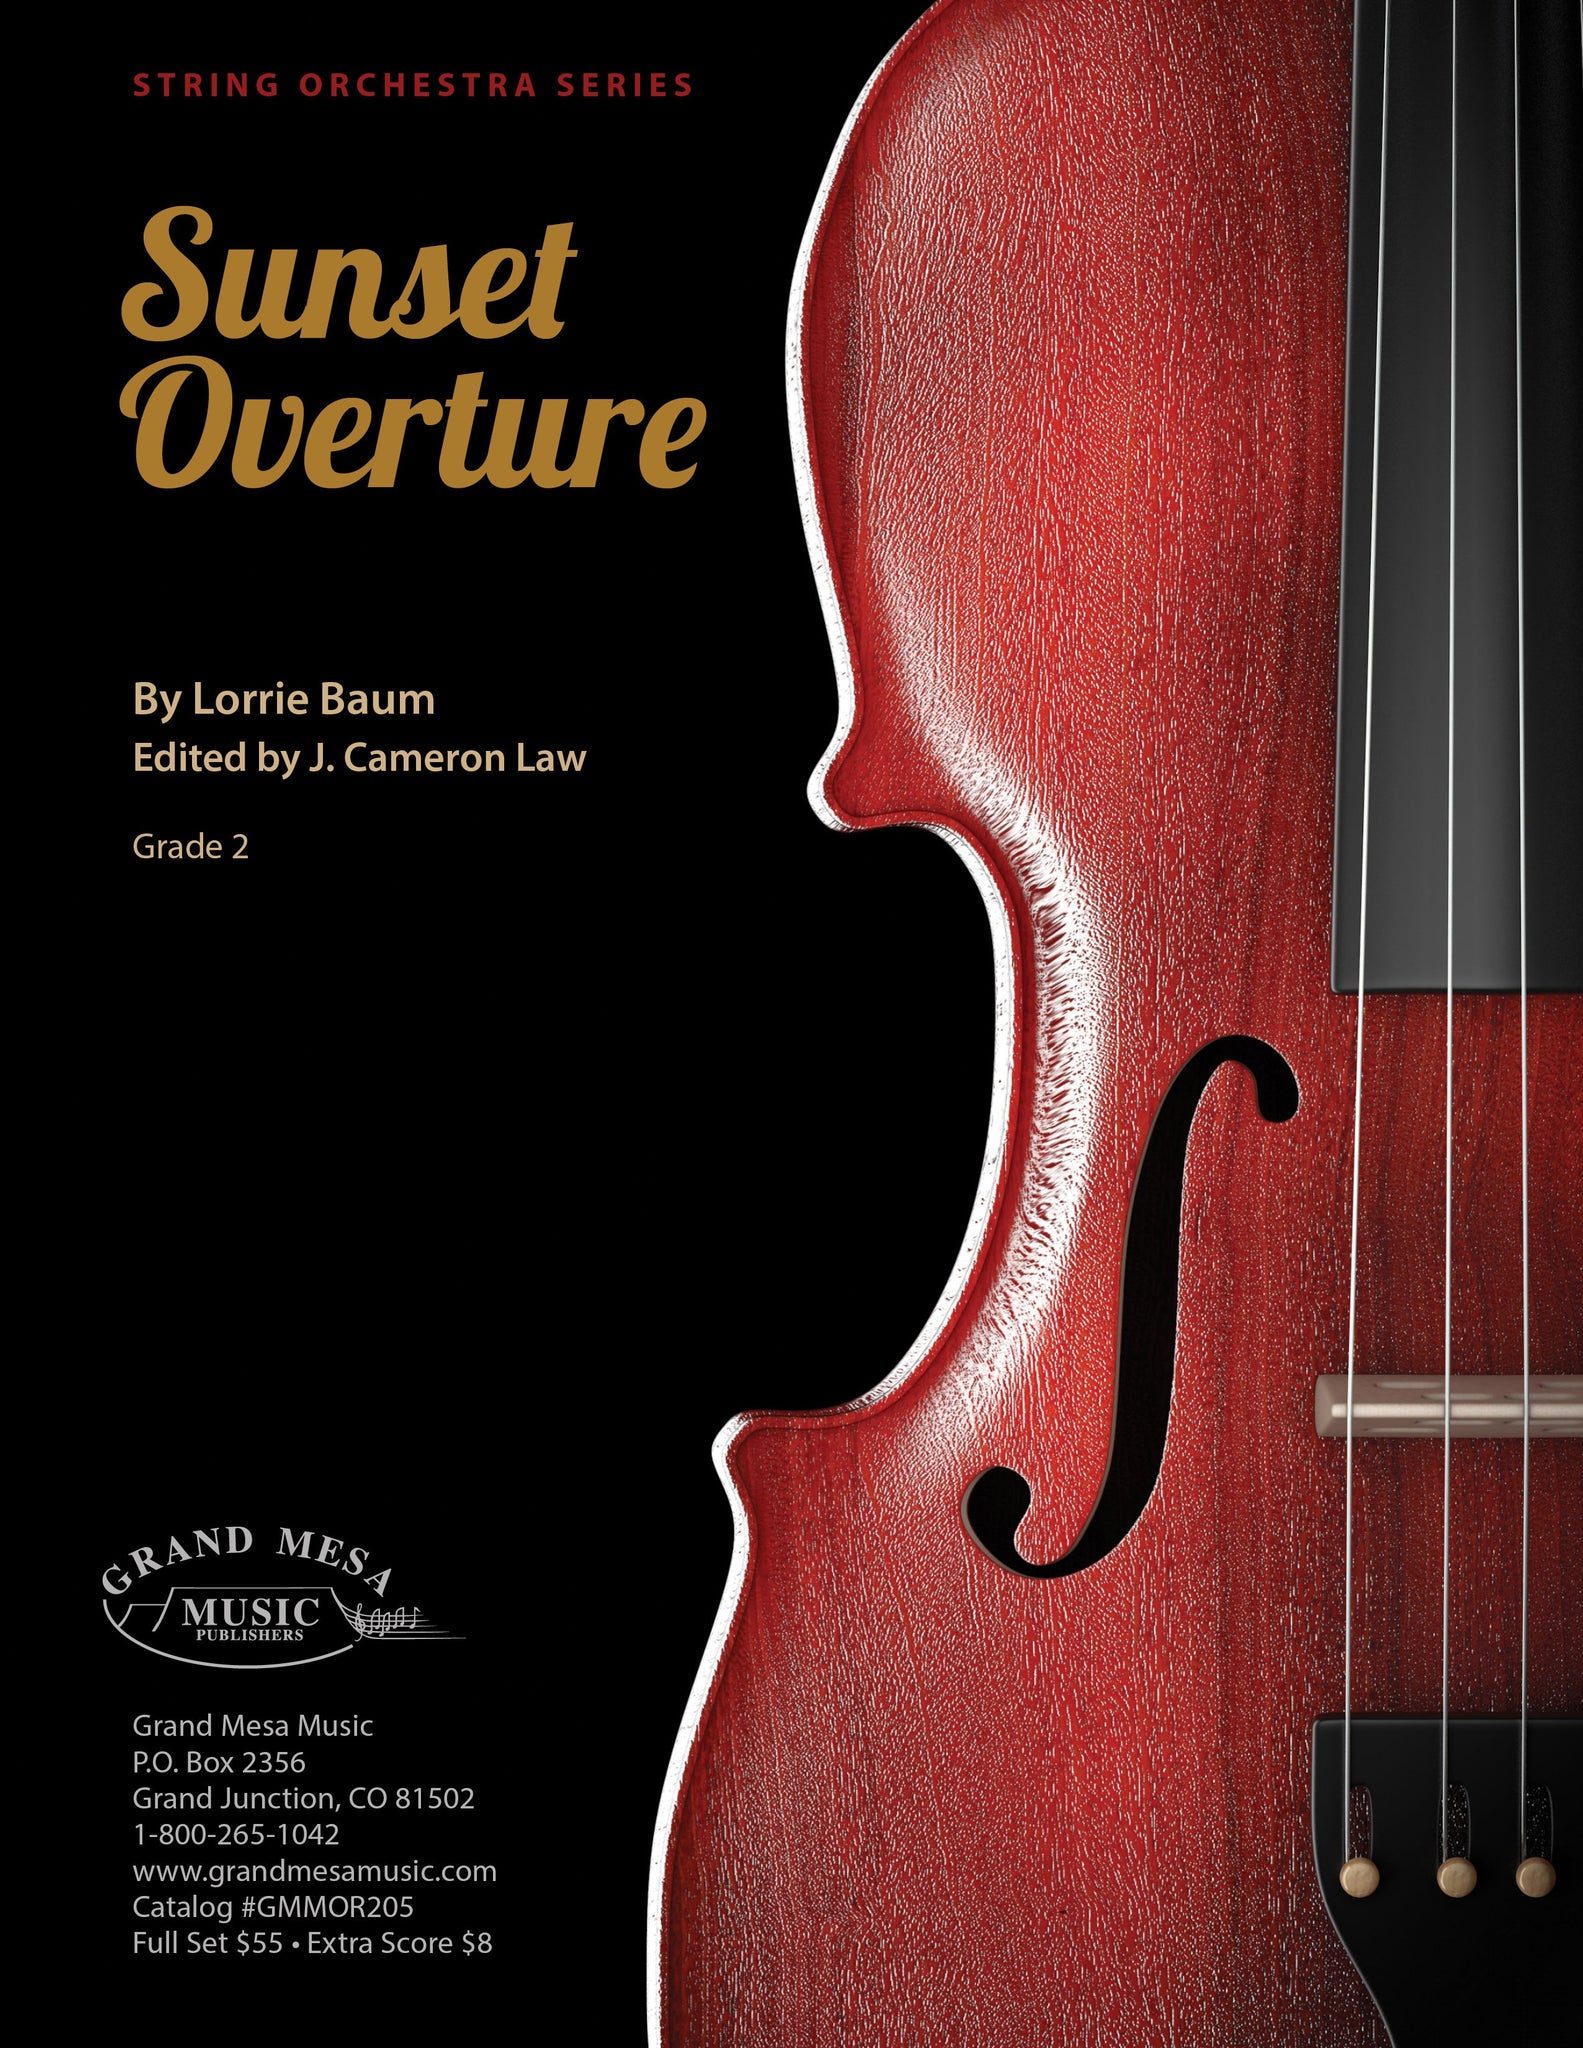 Strings sheet music cover of Sunset Overture, composed by Lorrie Baum.